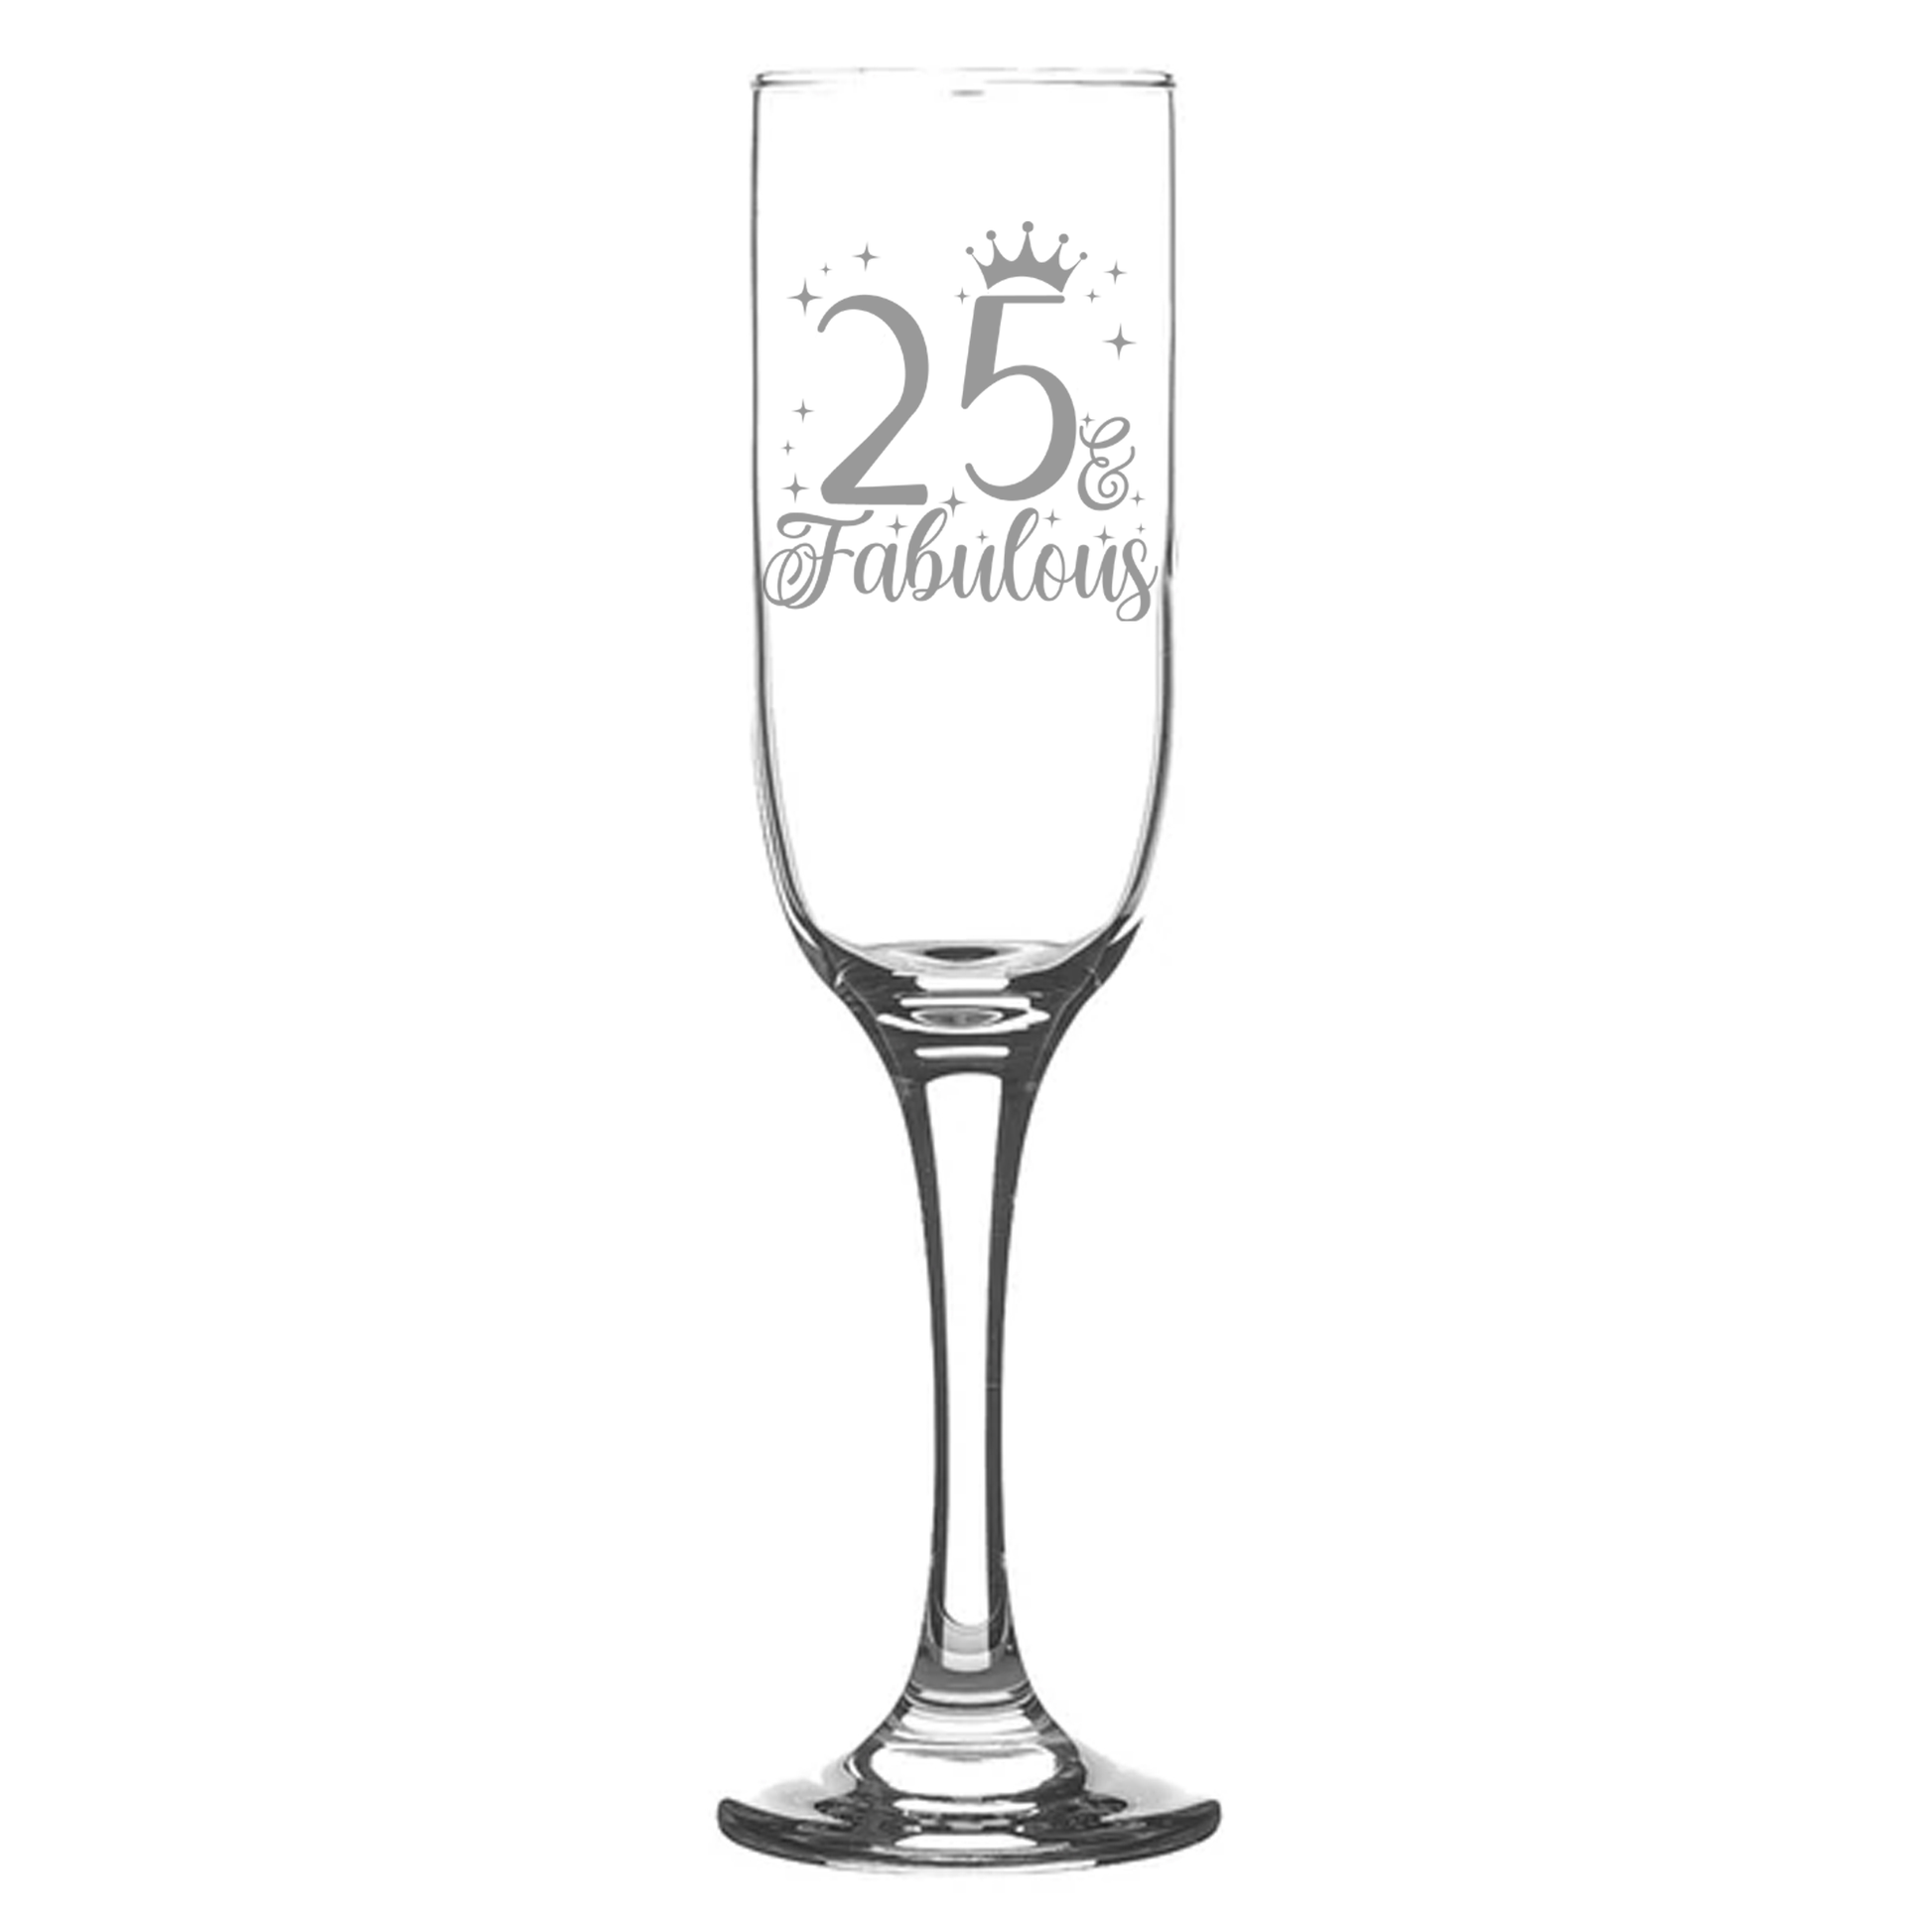 25 & Fabulous Engraved Champagne Glass and/or Coaster Set  - Always Looking Good - Champagne Glass On Its Own  